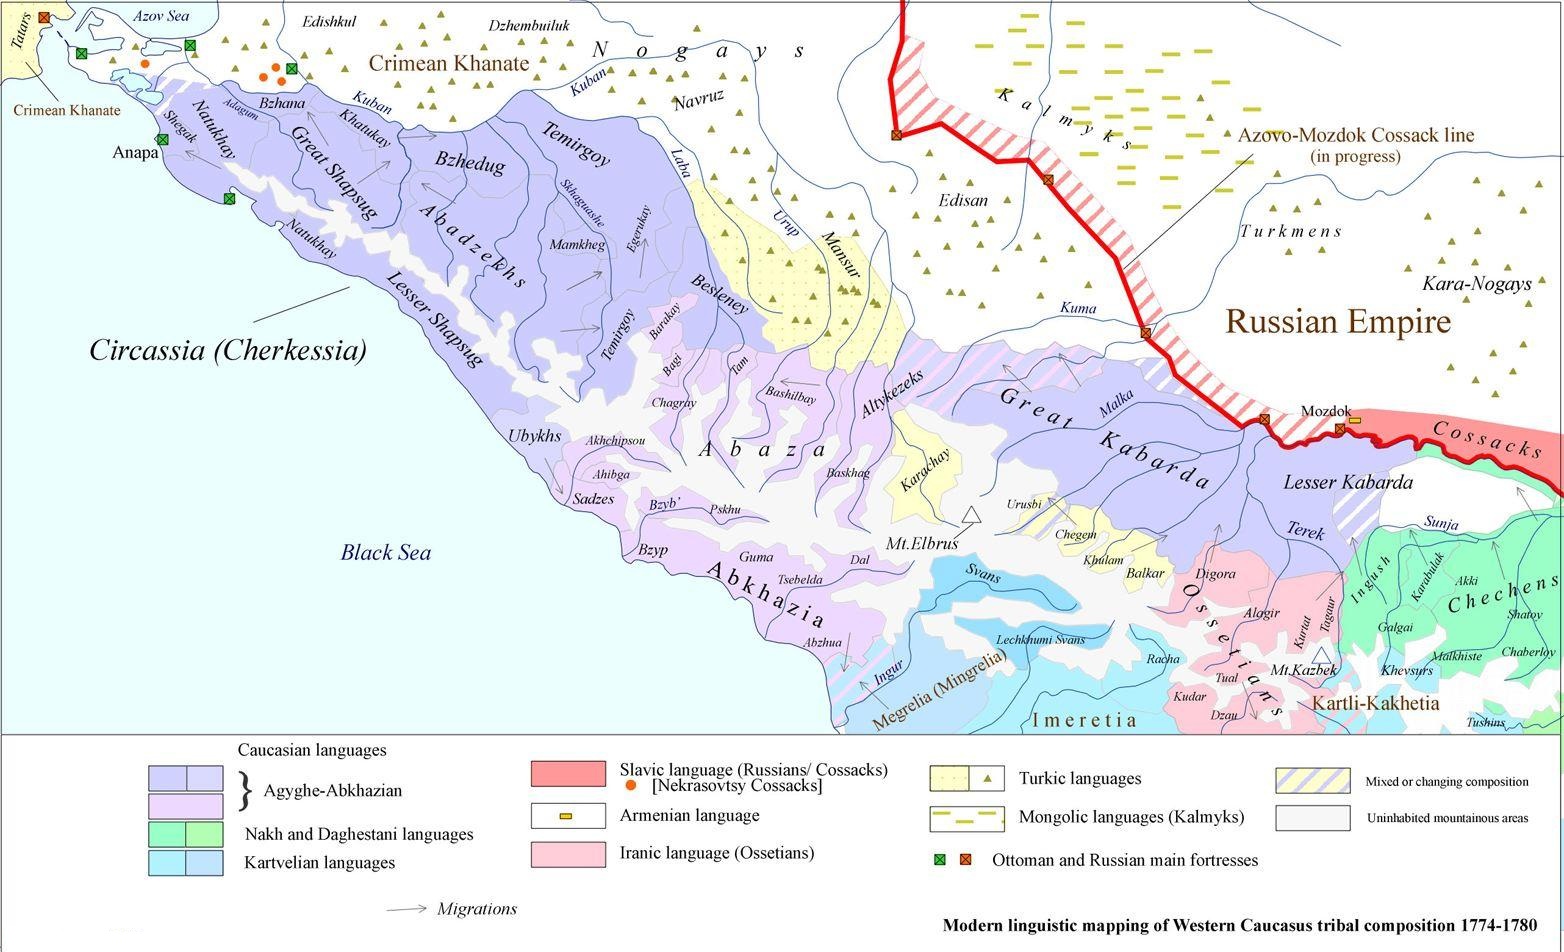 Modern linguistic mapping of Western Caucasus tribal composition 1774-1780 / Artur Tsutsiev